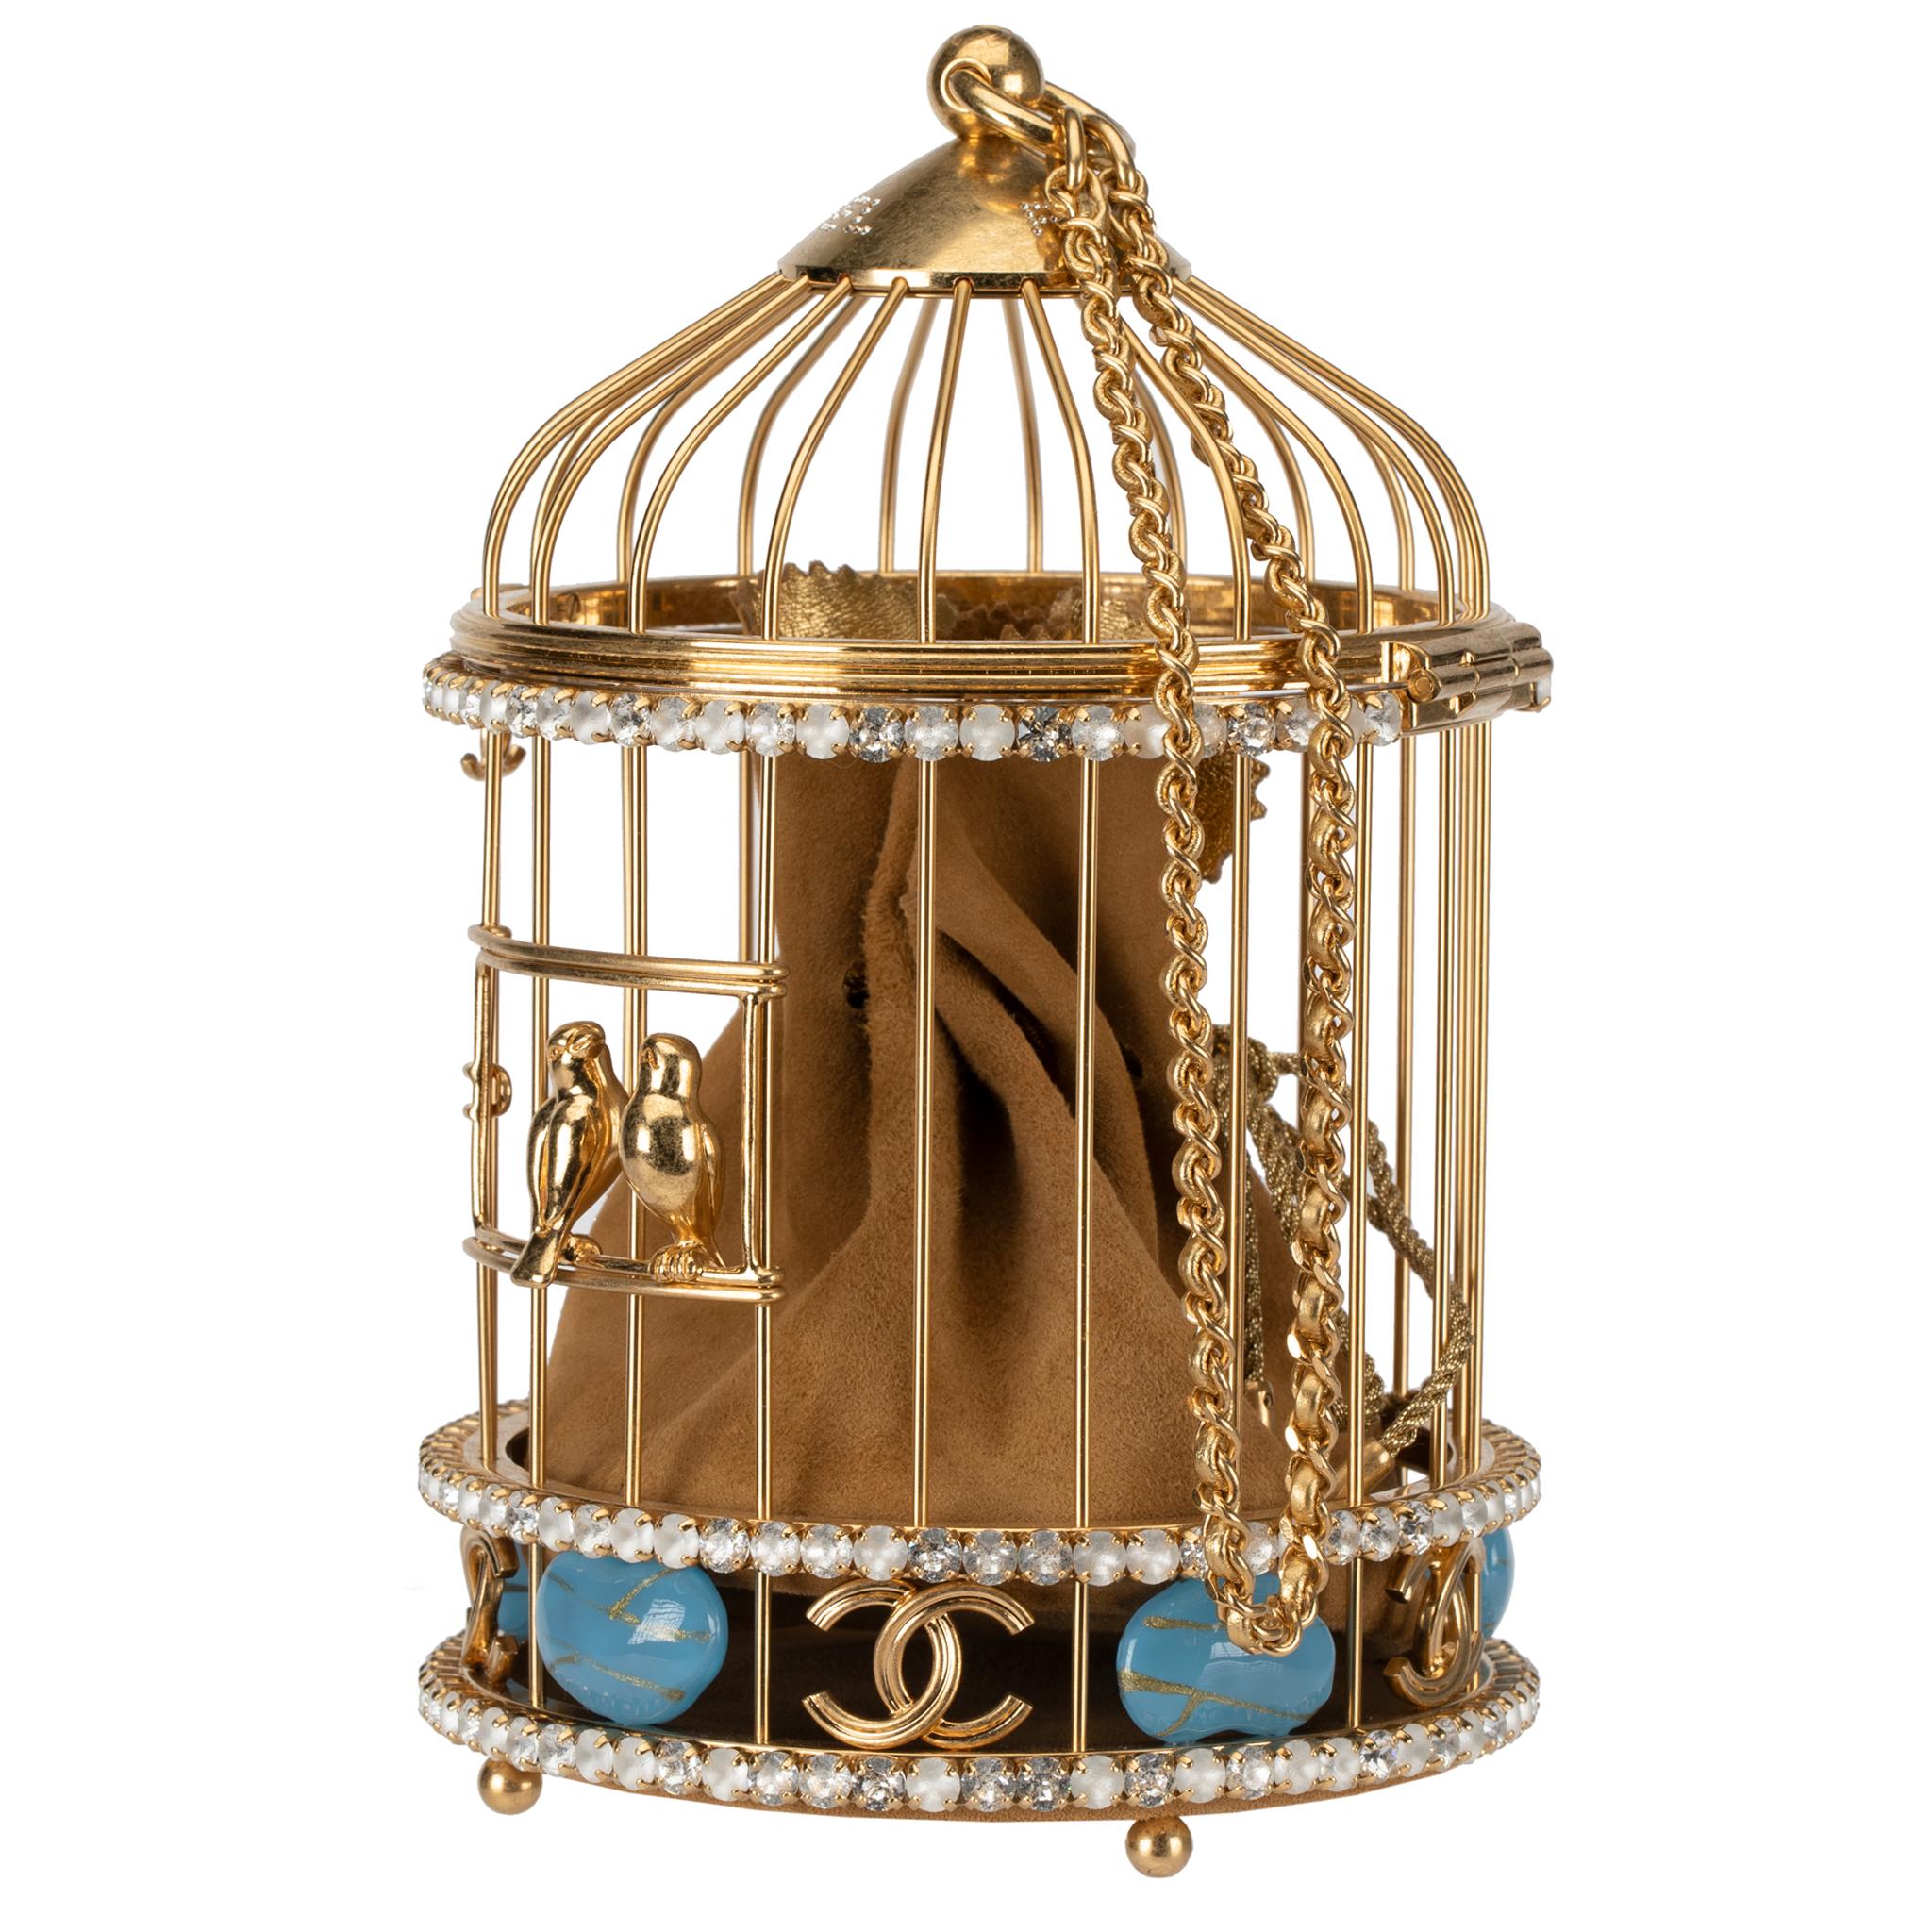 One of Chanel’s most ambitious creations to date – The Chanel lovebird minaudière needs no introduction. Skilfully designed with great detail and craftsmanship, this item is a must have for any avid collector. Bedazzled with rhinestones, double C